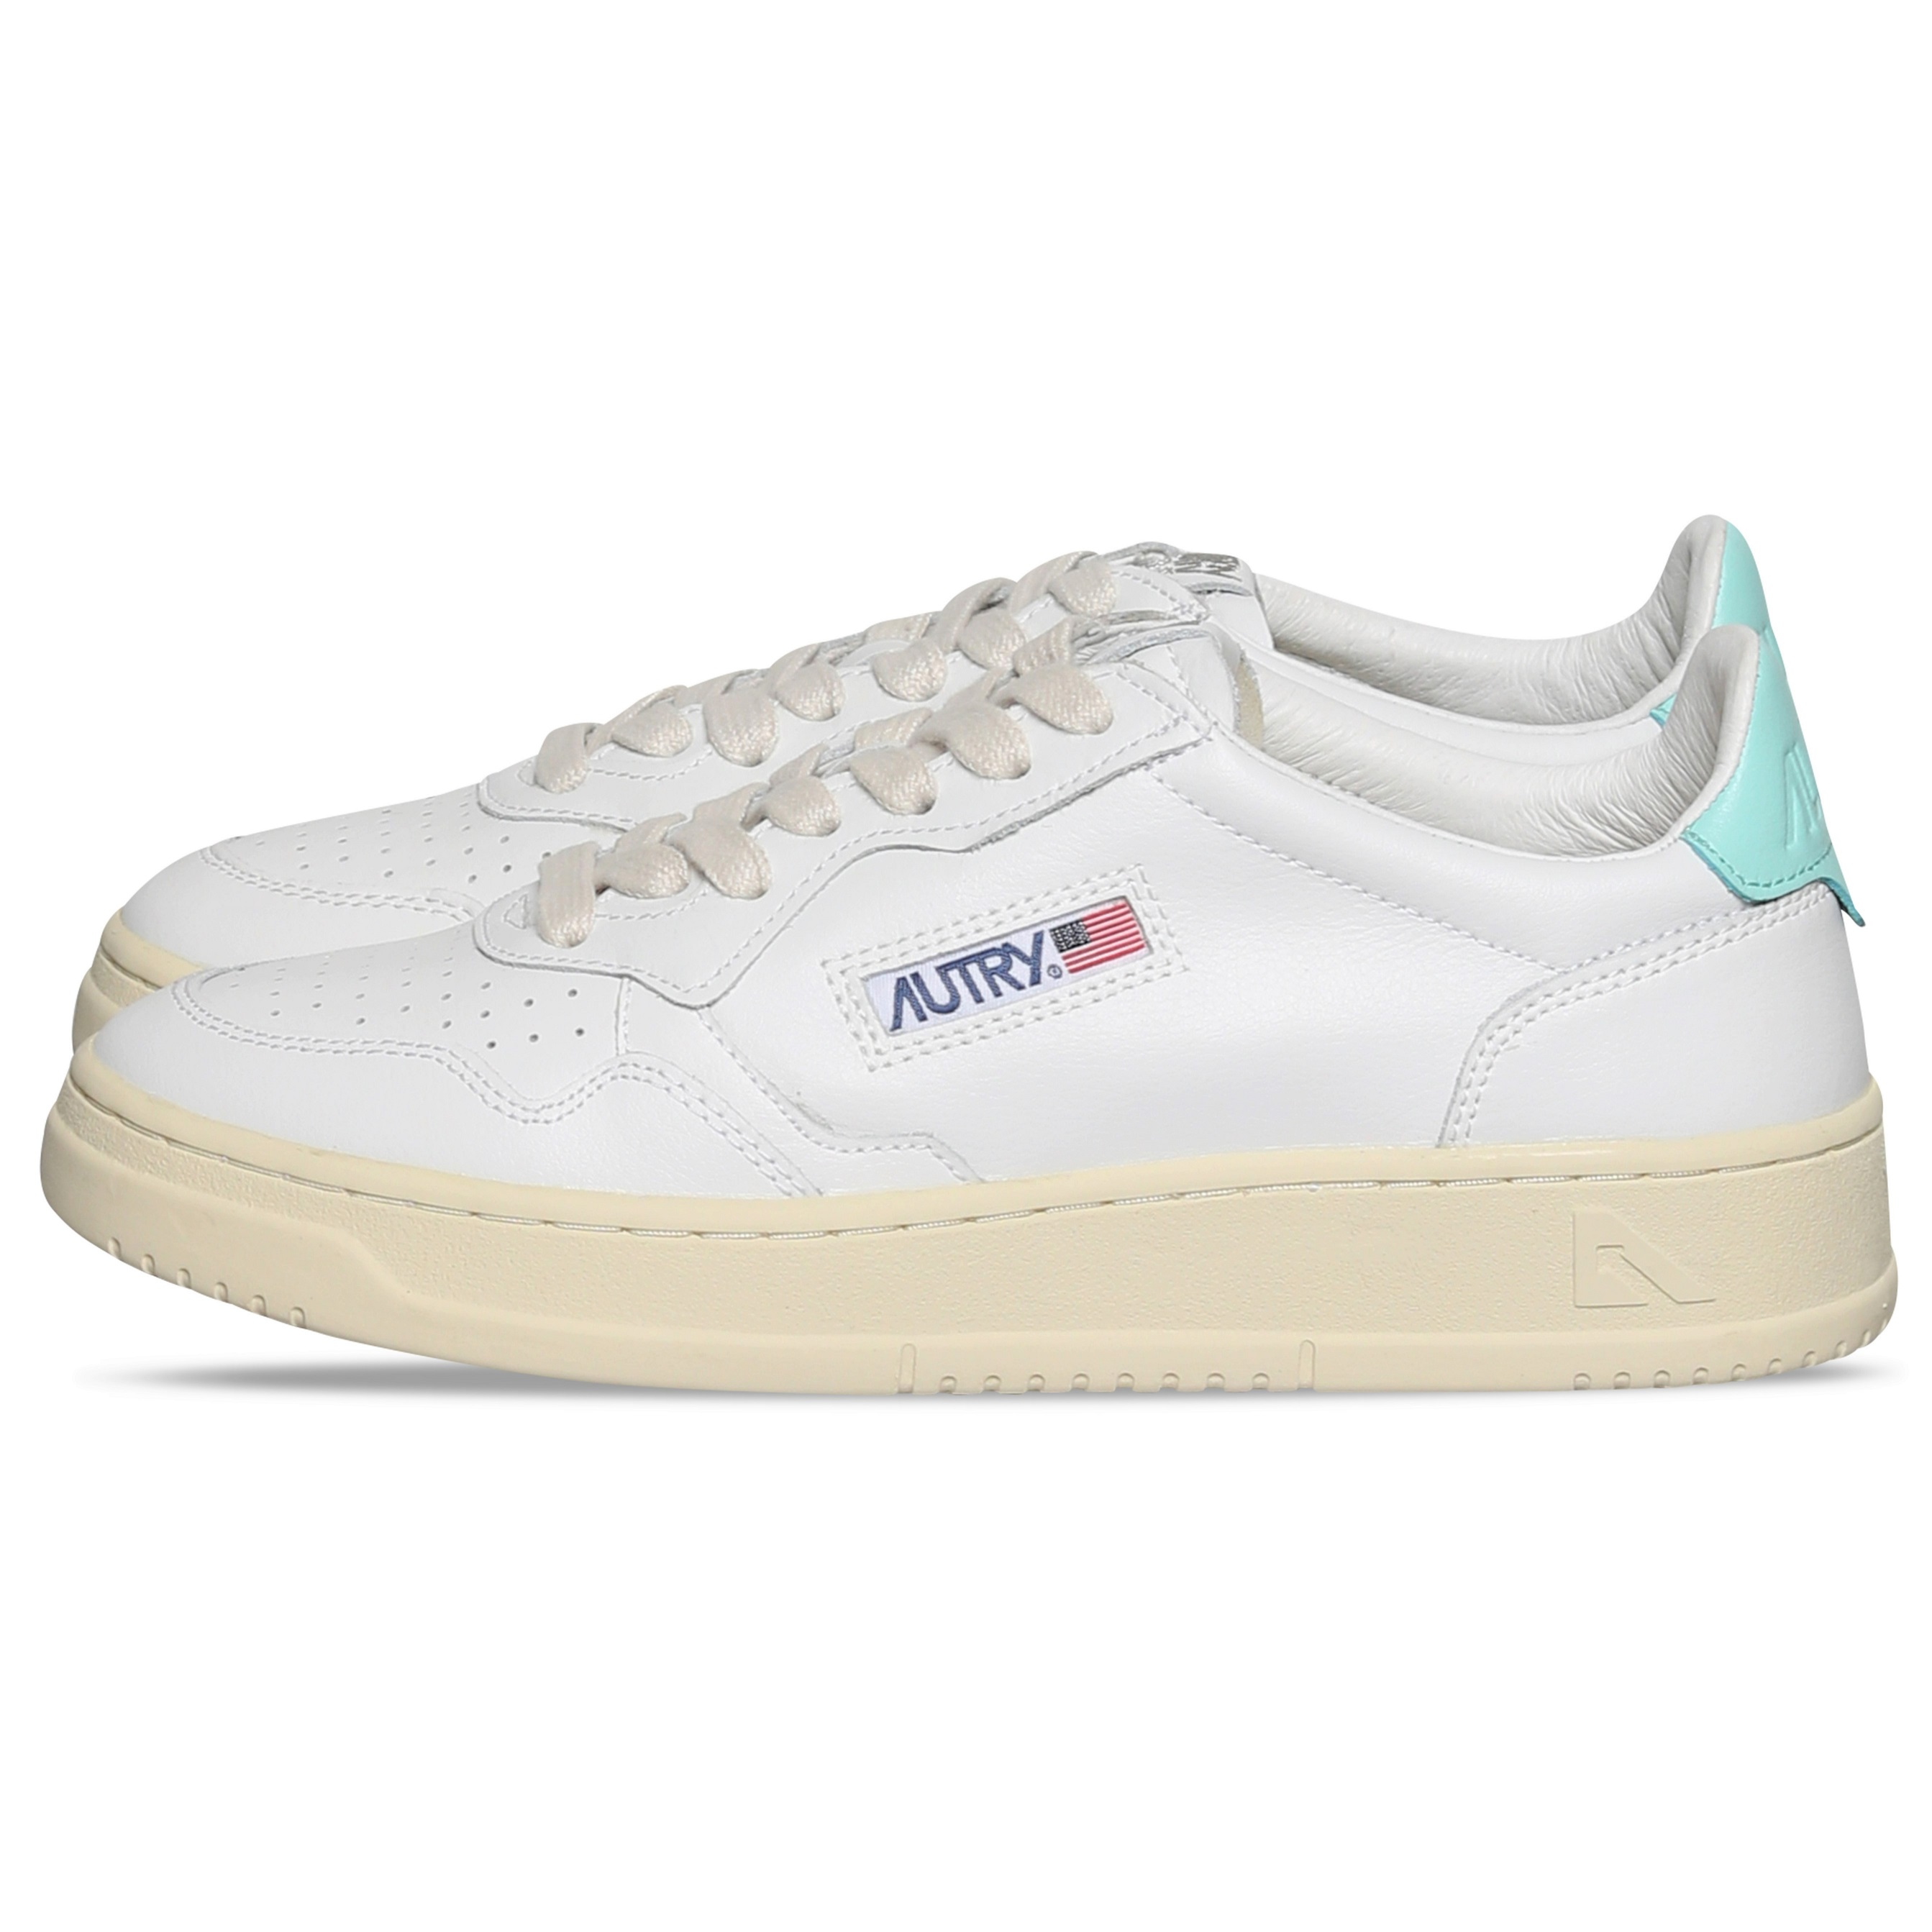 Autry Action Shoes Low Sneaker White/Pink